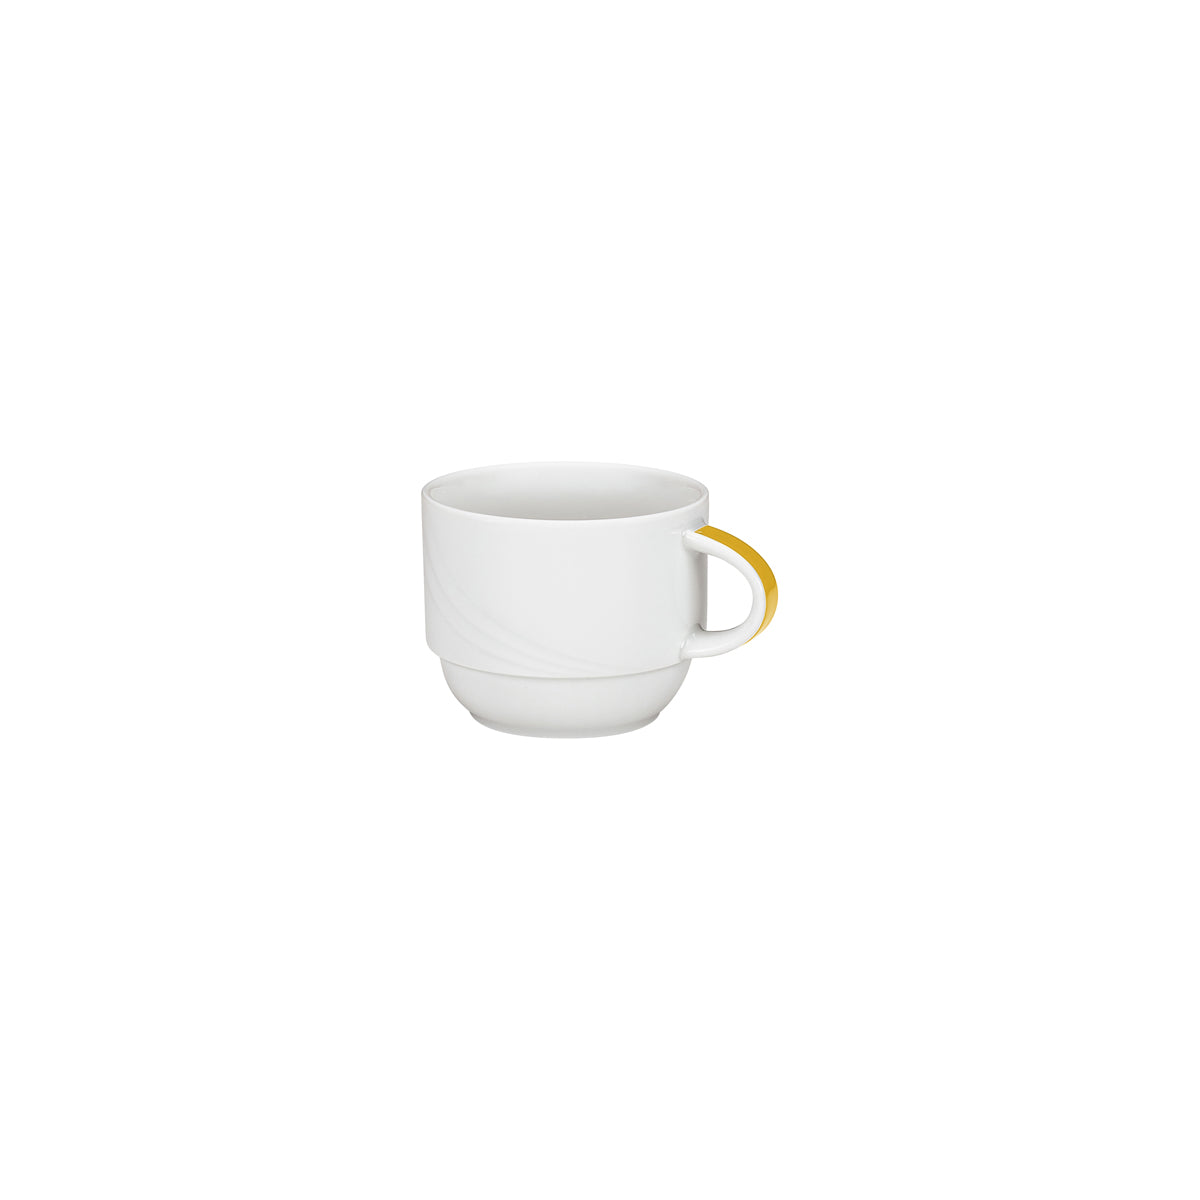 SH9185119/62981 Donna Senior Decor Stackable Cup with Yellow Band 180ml Tomkin Australia Hospitality Supplies